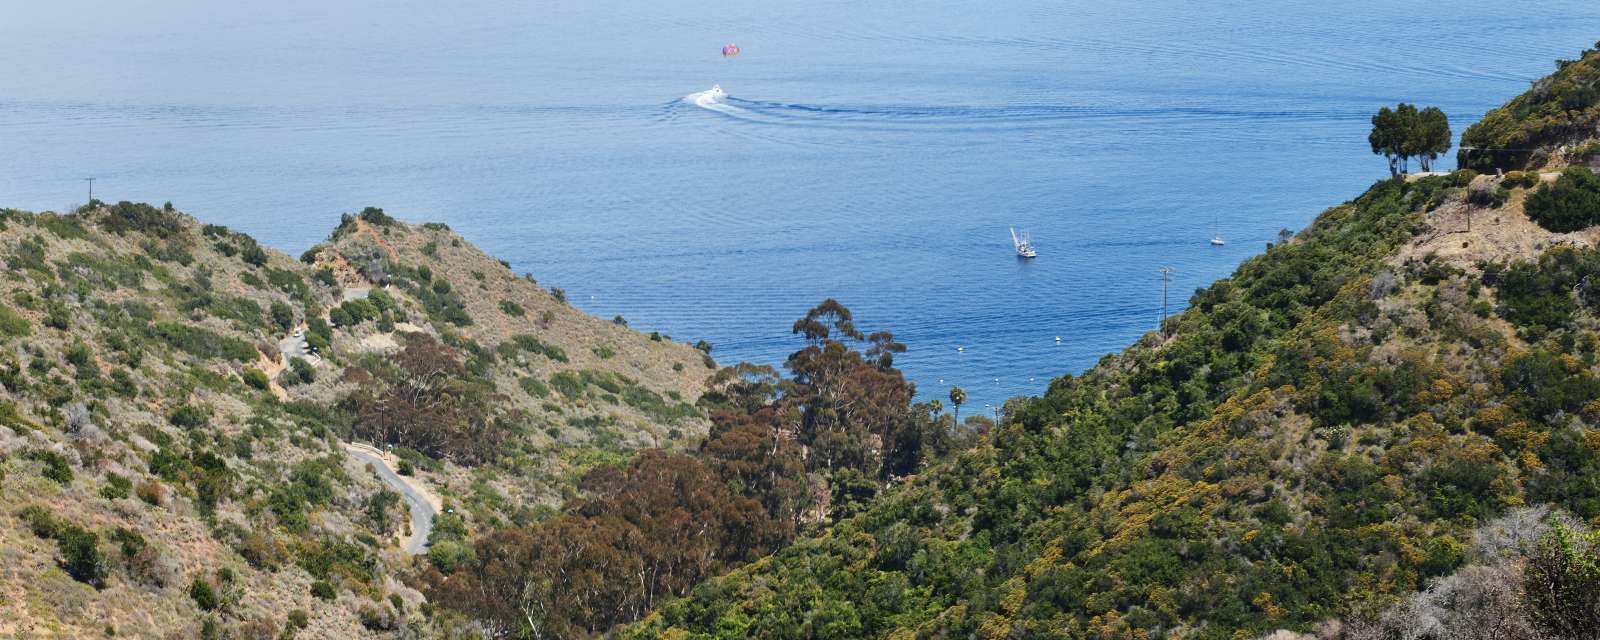 Two Harbors Webcam Live Views Of Catalina Island Visit